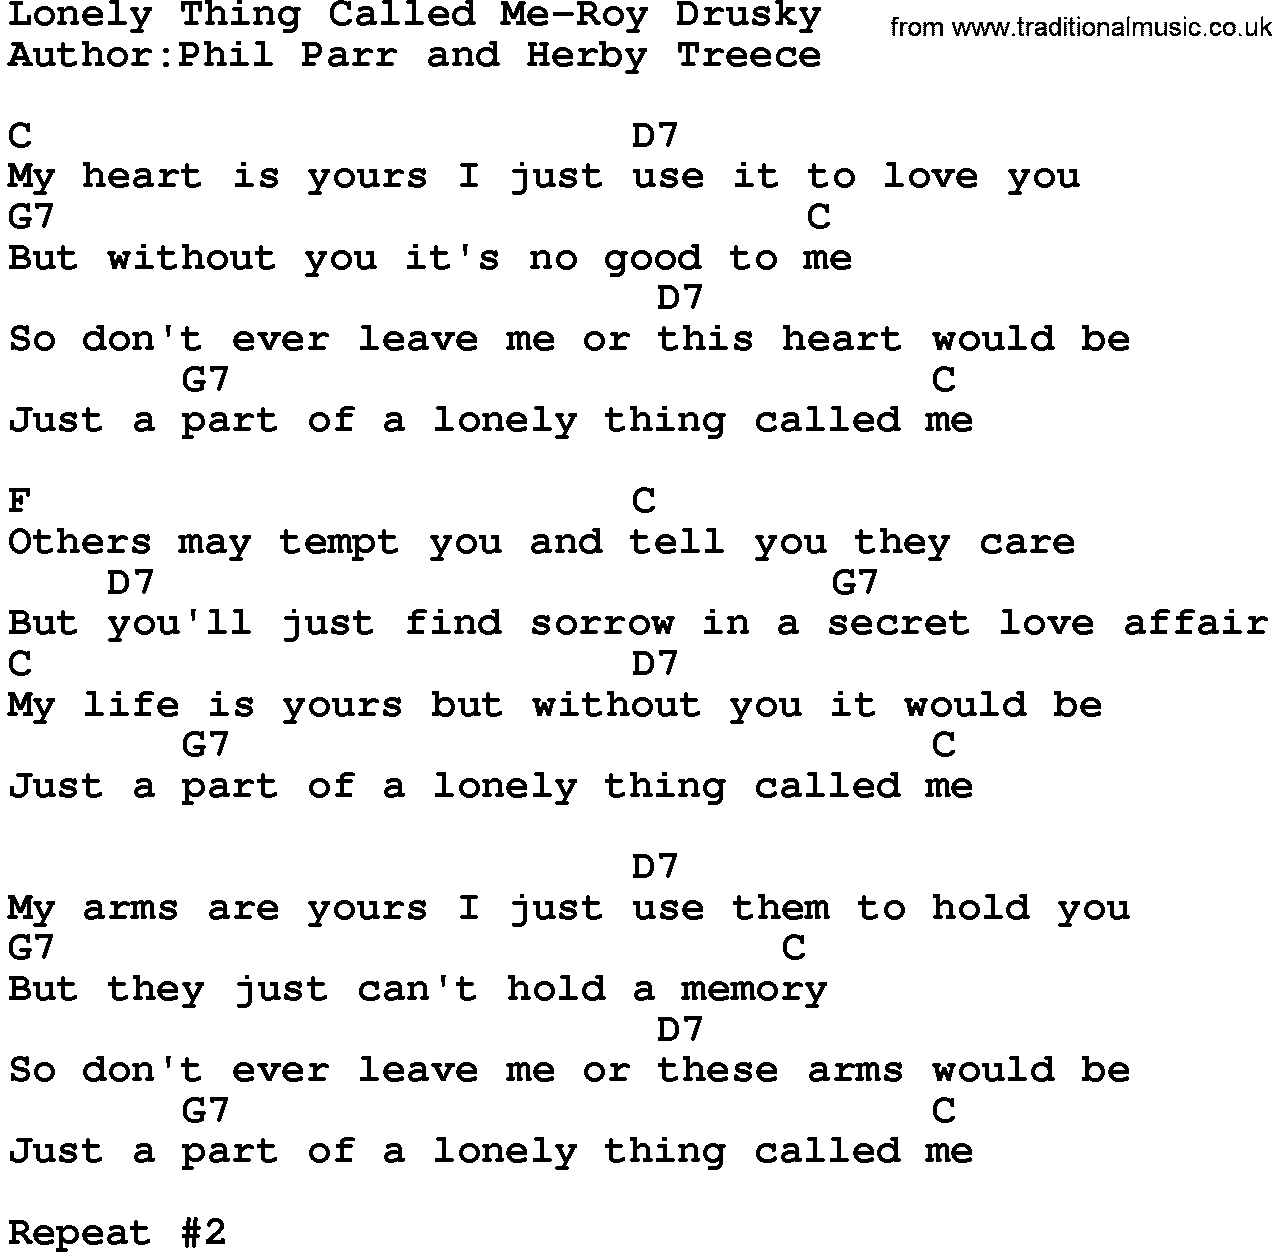 Country music song: Lonely Thing Called Me-Roy Drusky lyrics and chords